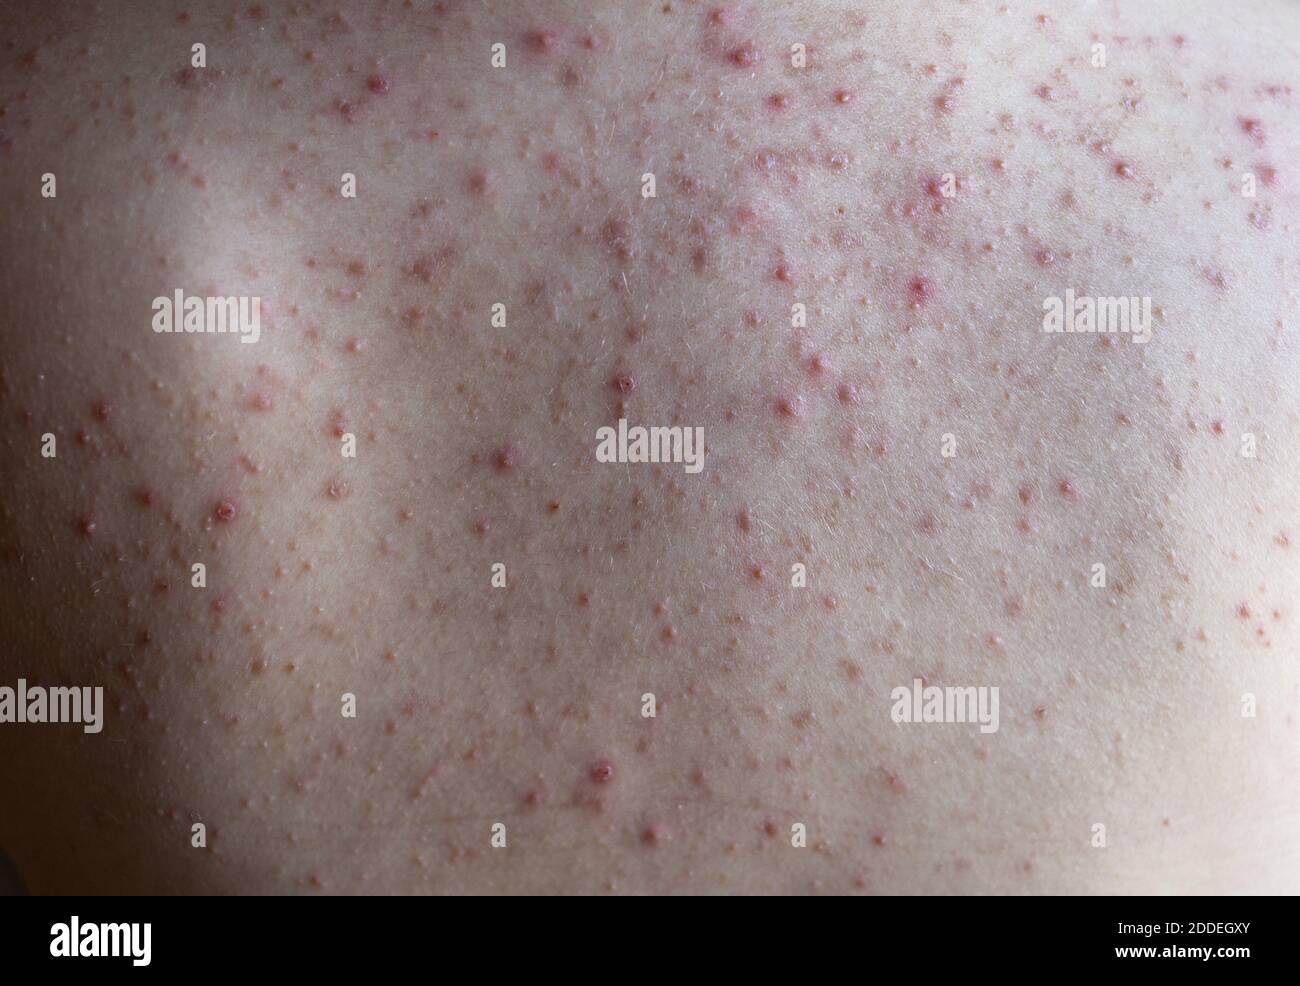 woman back with acne, red spots, skin disease Stock Photo